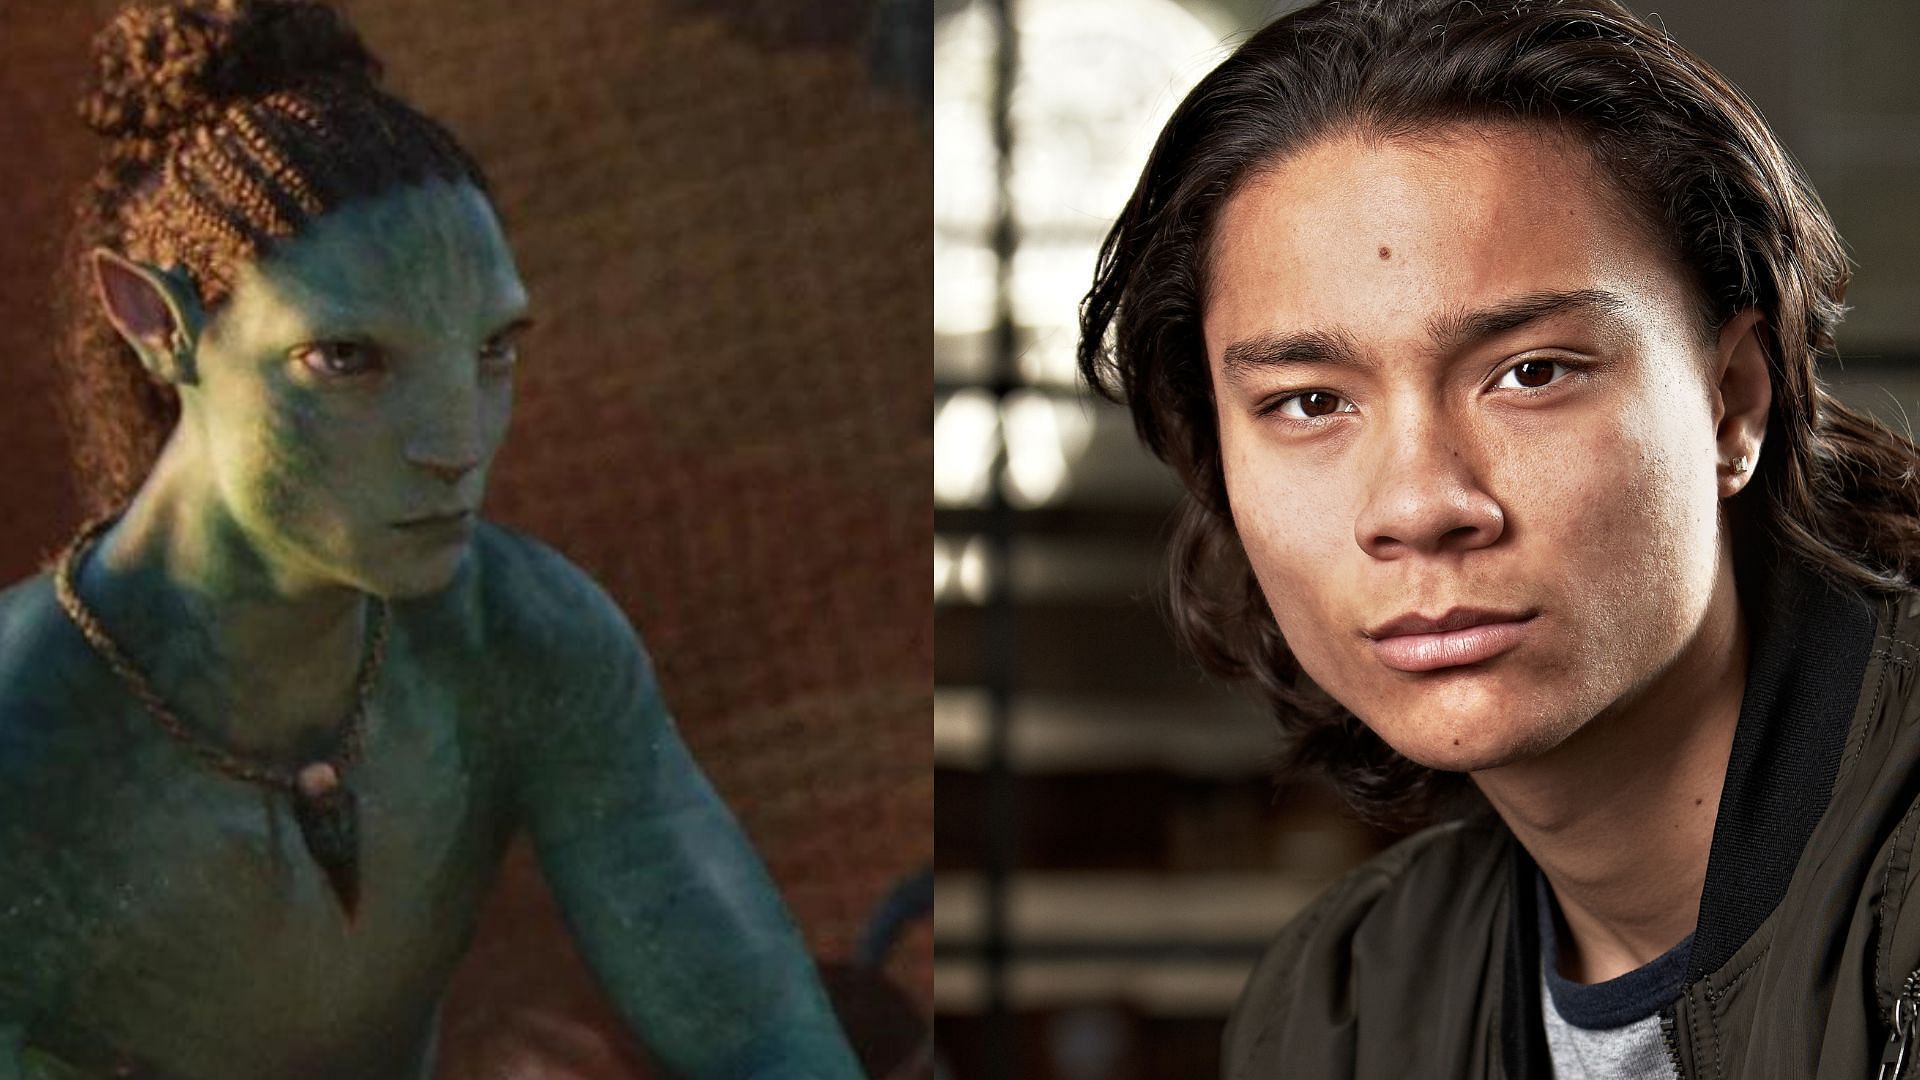 Avatar: The Way of Water cast, Full list of characters and actors